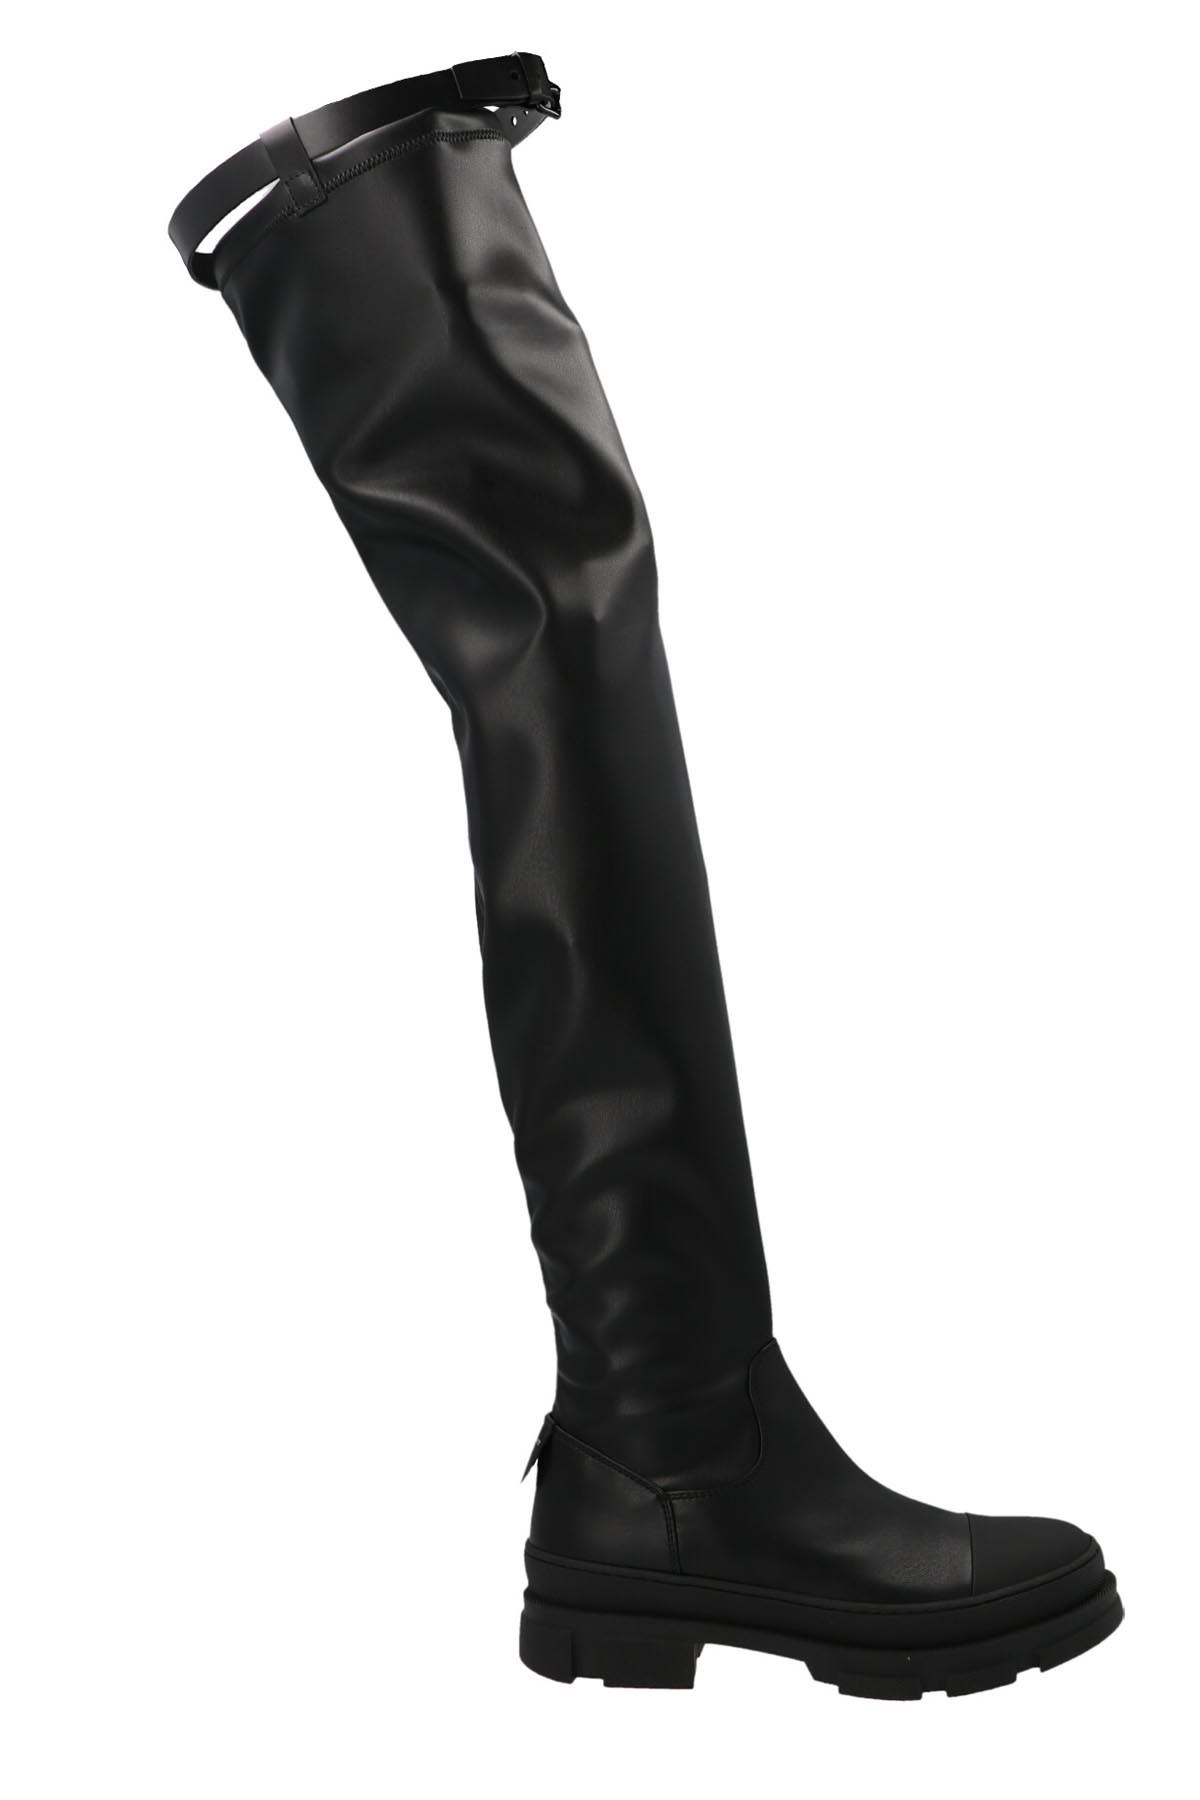 PHILOSOPHY Over-The-Knee Buckle Boots